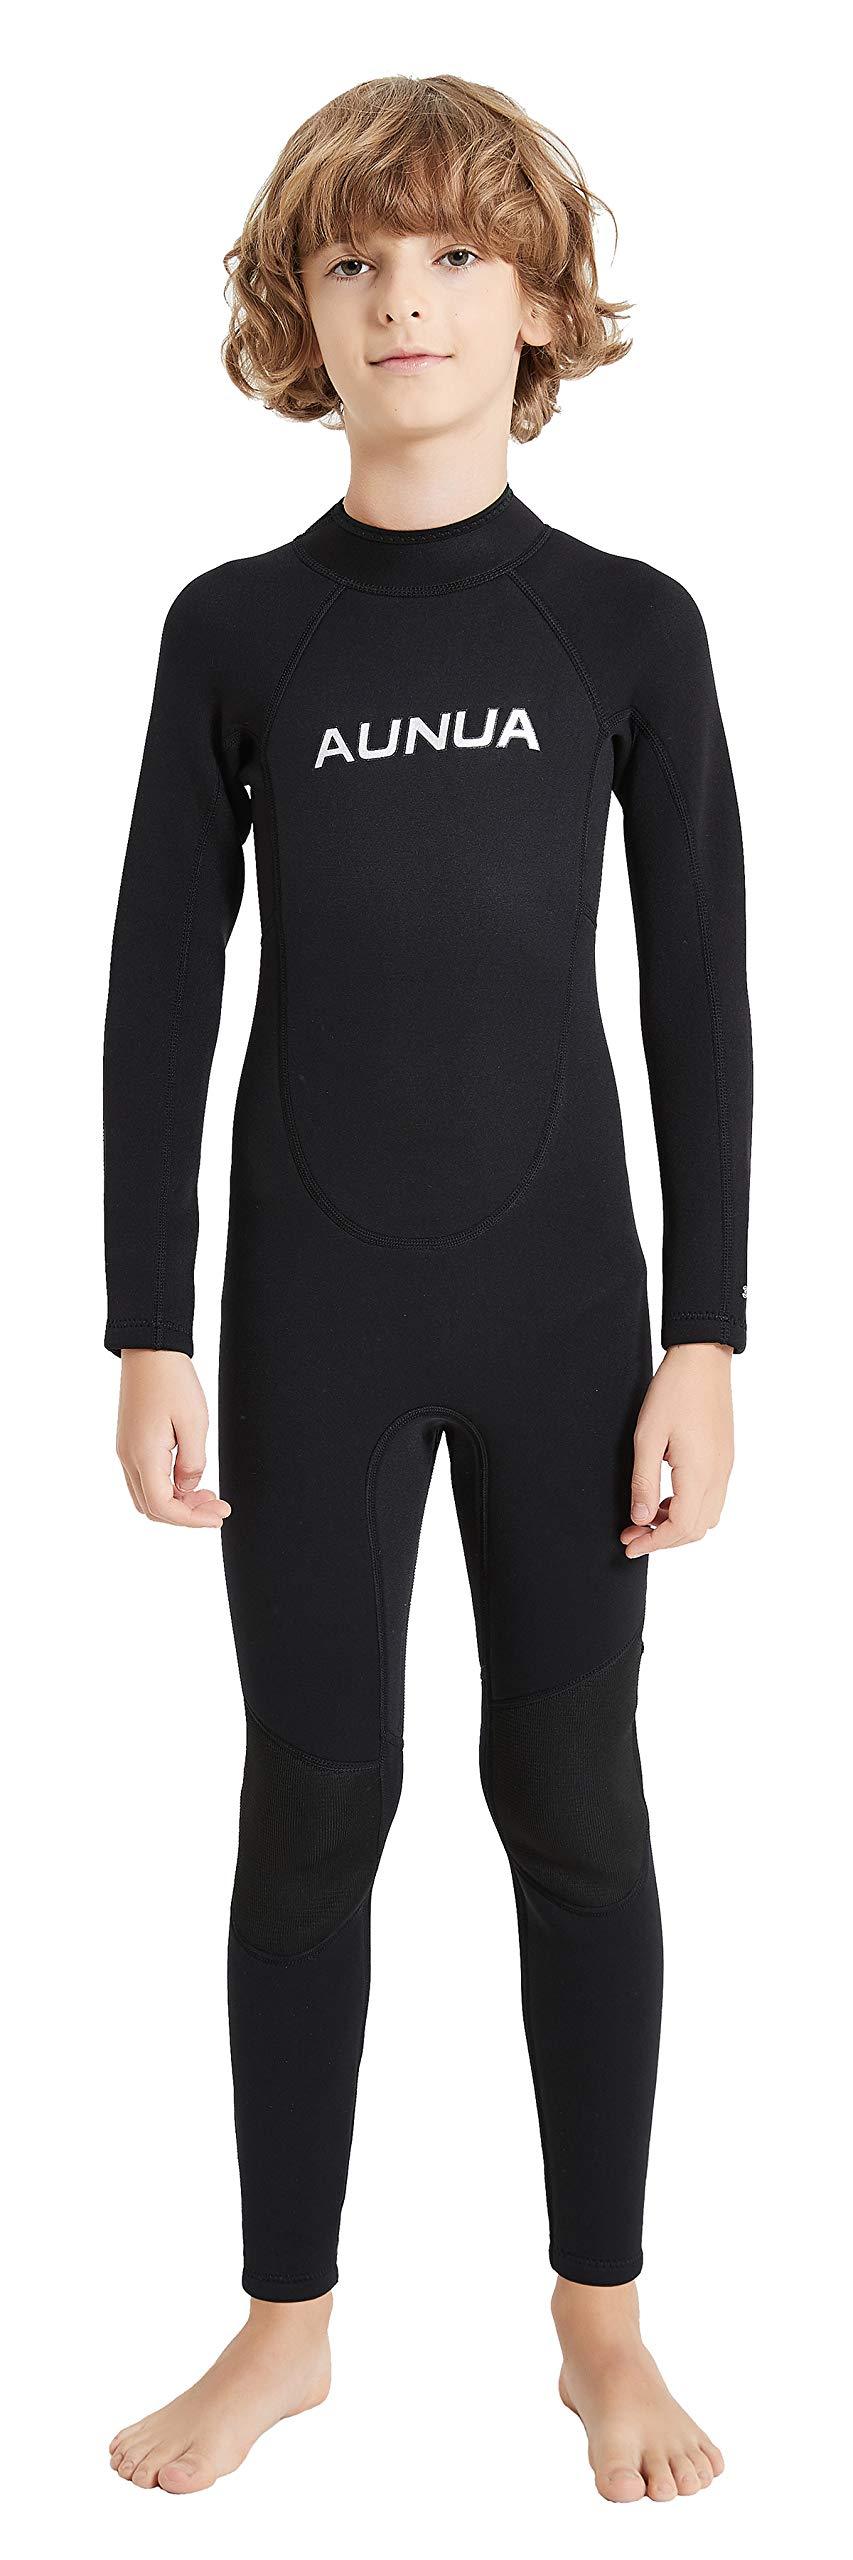 [AUSTRALIA] - Aunua Youth 3/2mm Neoprene Wetsuits for Kids Full Wetsuit Swimming Suit Keep Warm Full Wetsuit Black 6 